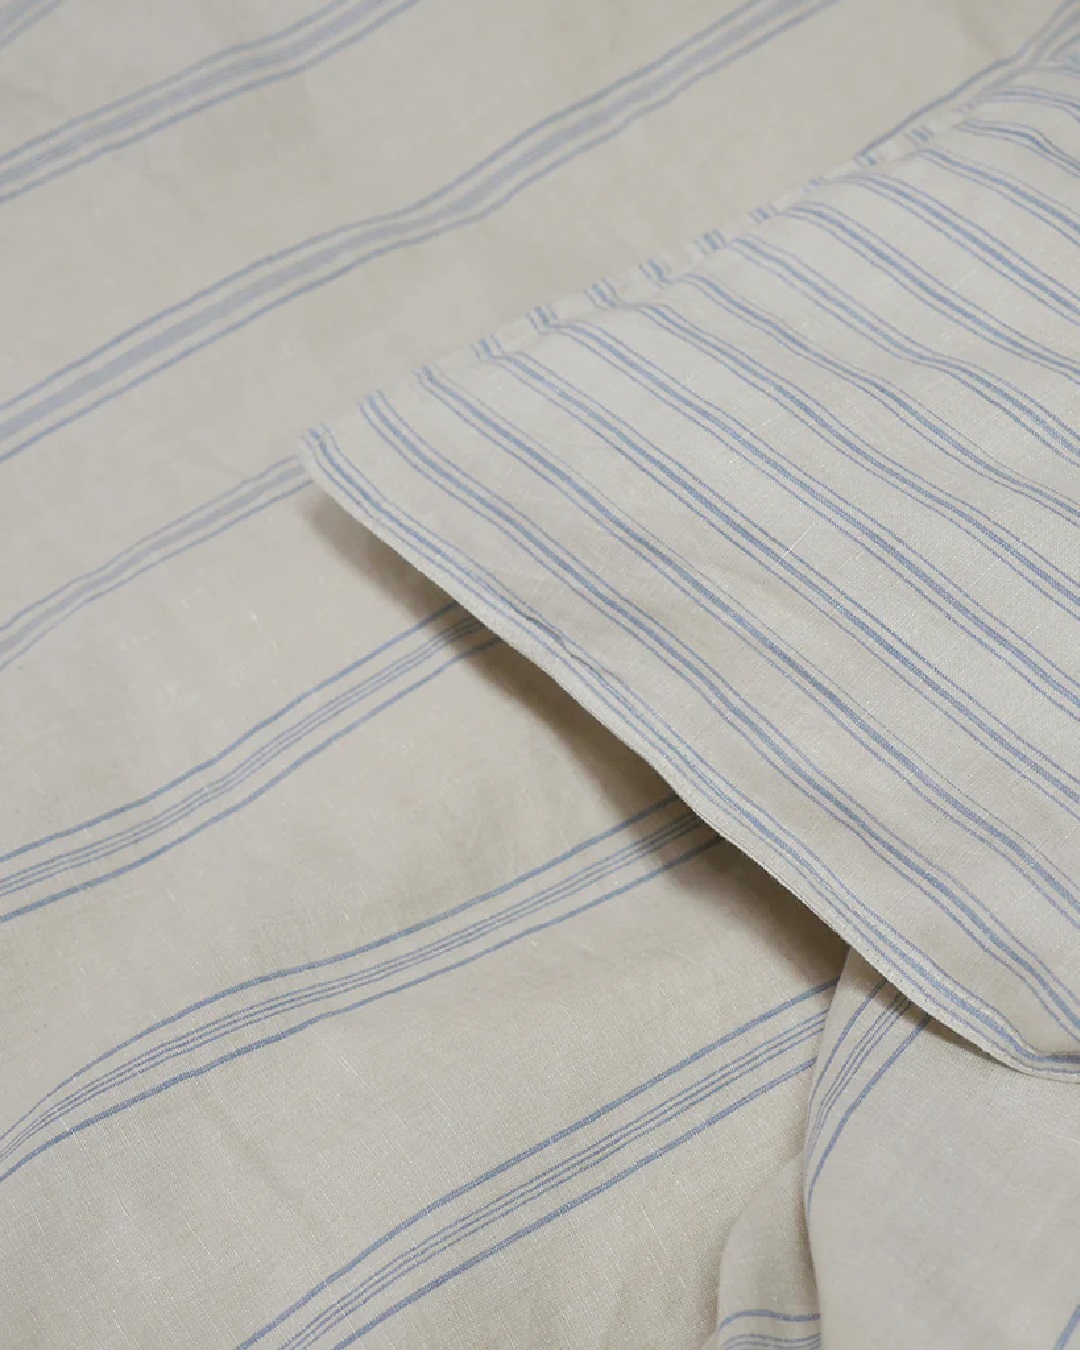 Striped blue and white sheets and duvet on bed